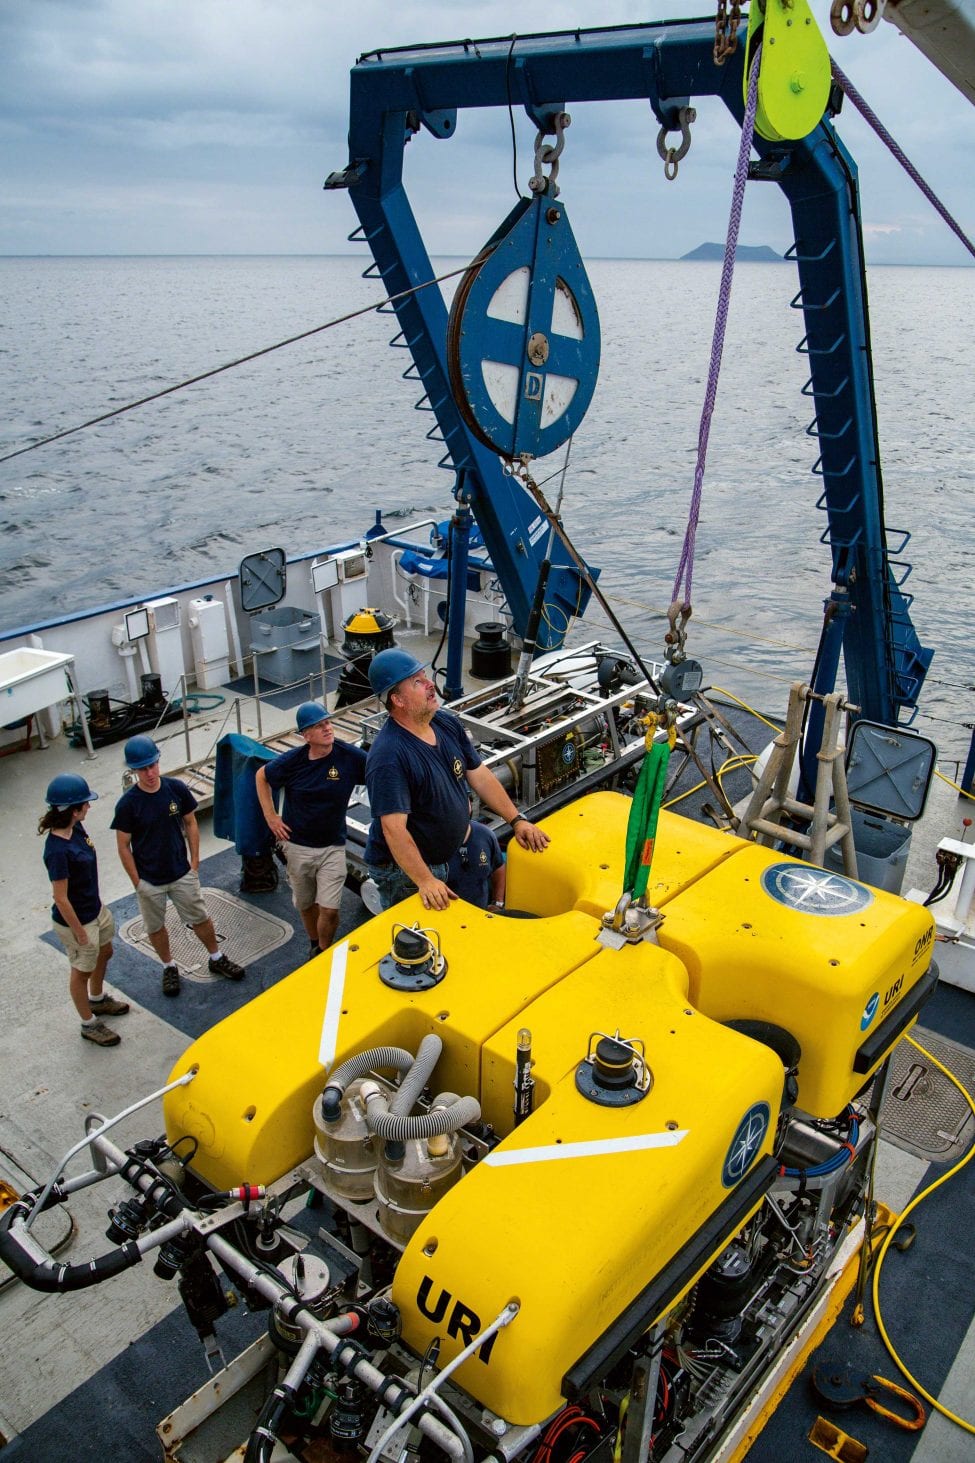 A host of technologies, like ROVs, allow scientists to explore deep-sea habitats. This kind of capacity is vital to monitor changes to life in the deepest reaches. While these parts of the oceans remain relatively unexplored, human exploitation in the form of deep-sea mining and fishing is quickly catching up to even the hardest-to-reach regions.<br />
Photo by Ocean Exploration Trust | Nautilus Live Copyright